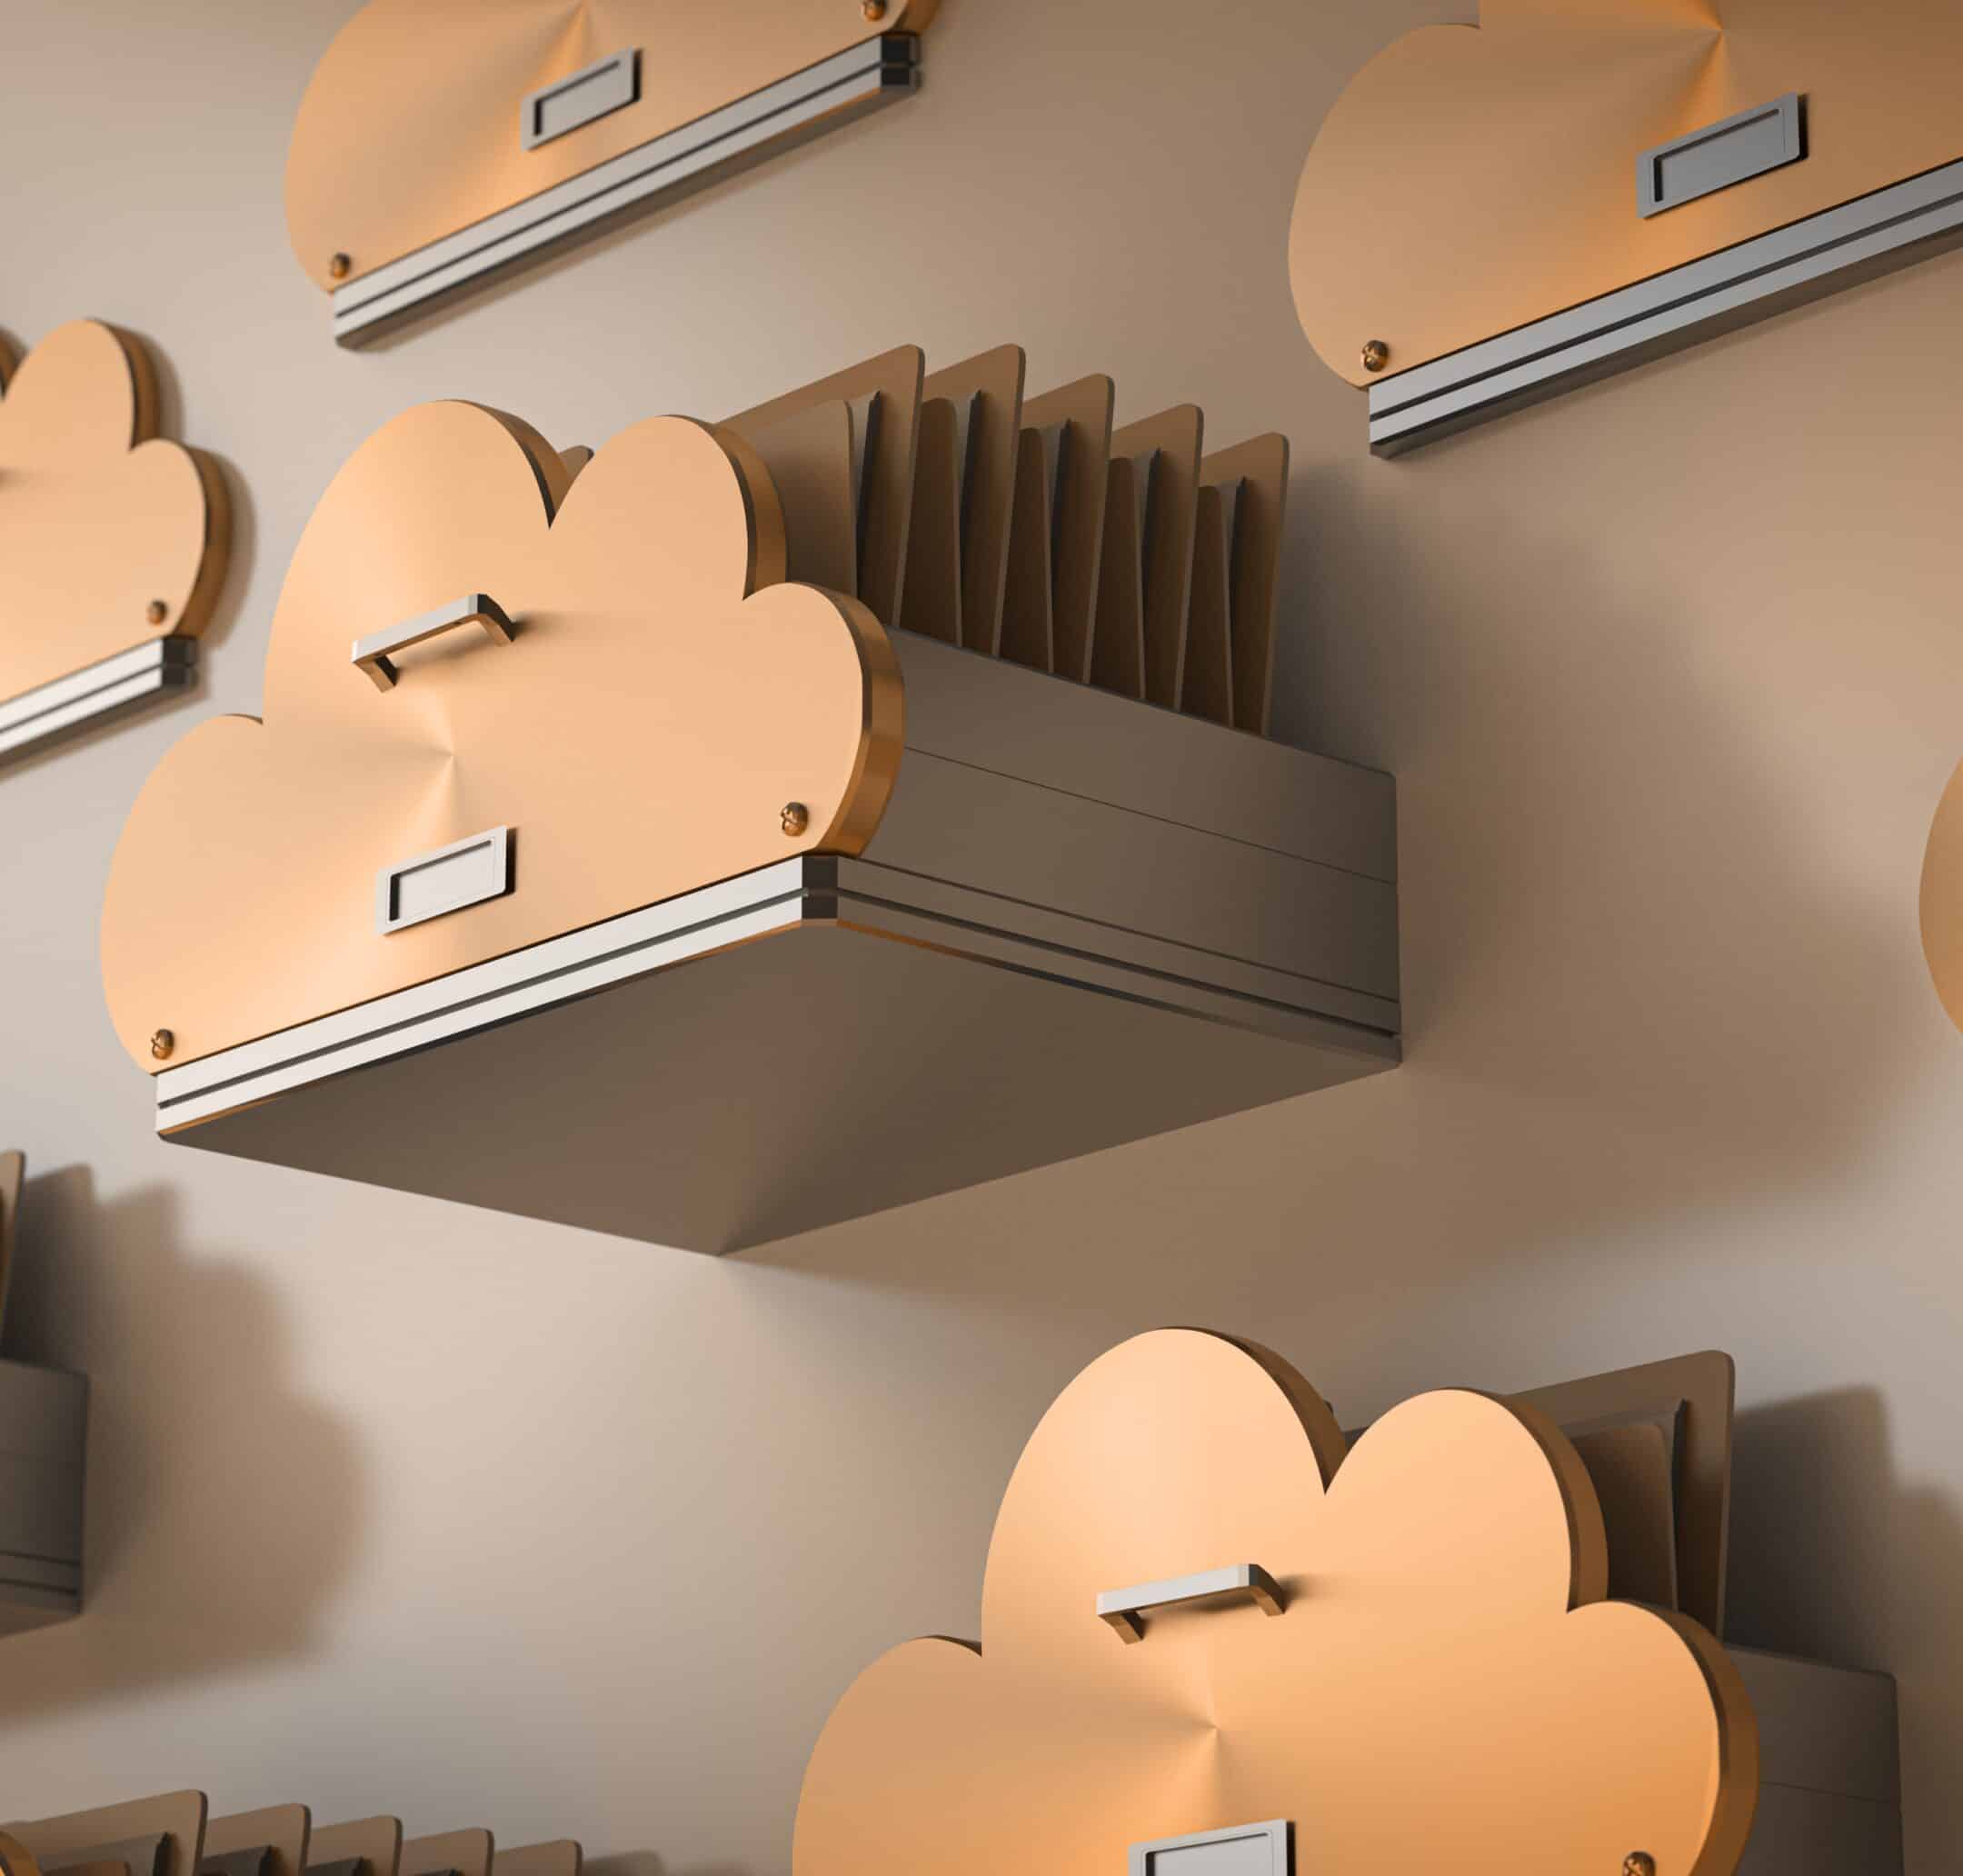 Cynerge Consulting| image: cloud-storage-with-drawer-with-files-cloud-brown